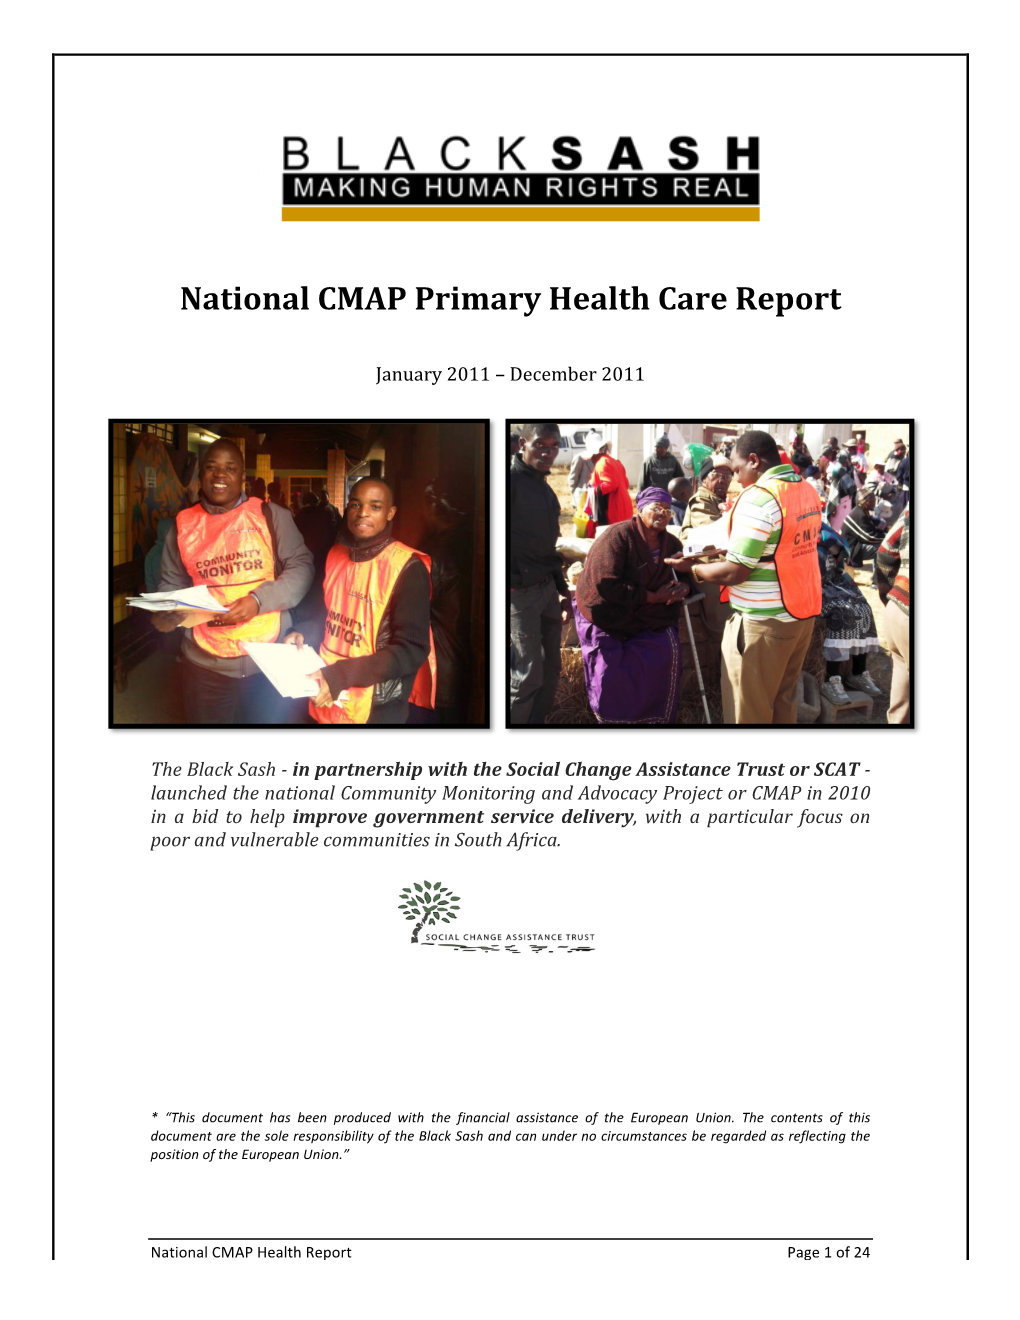 National CMAP Primary Health Care Report